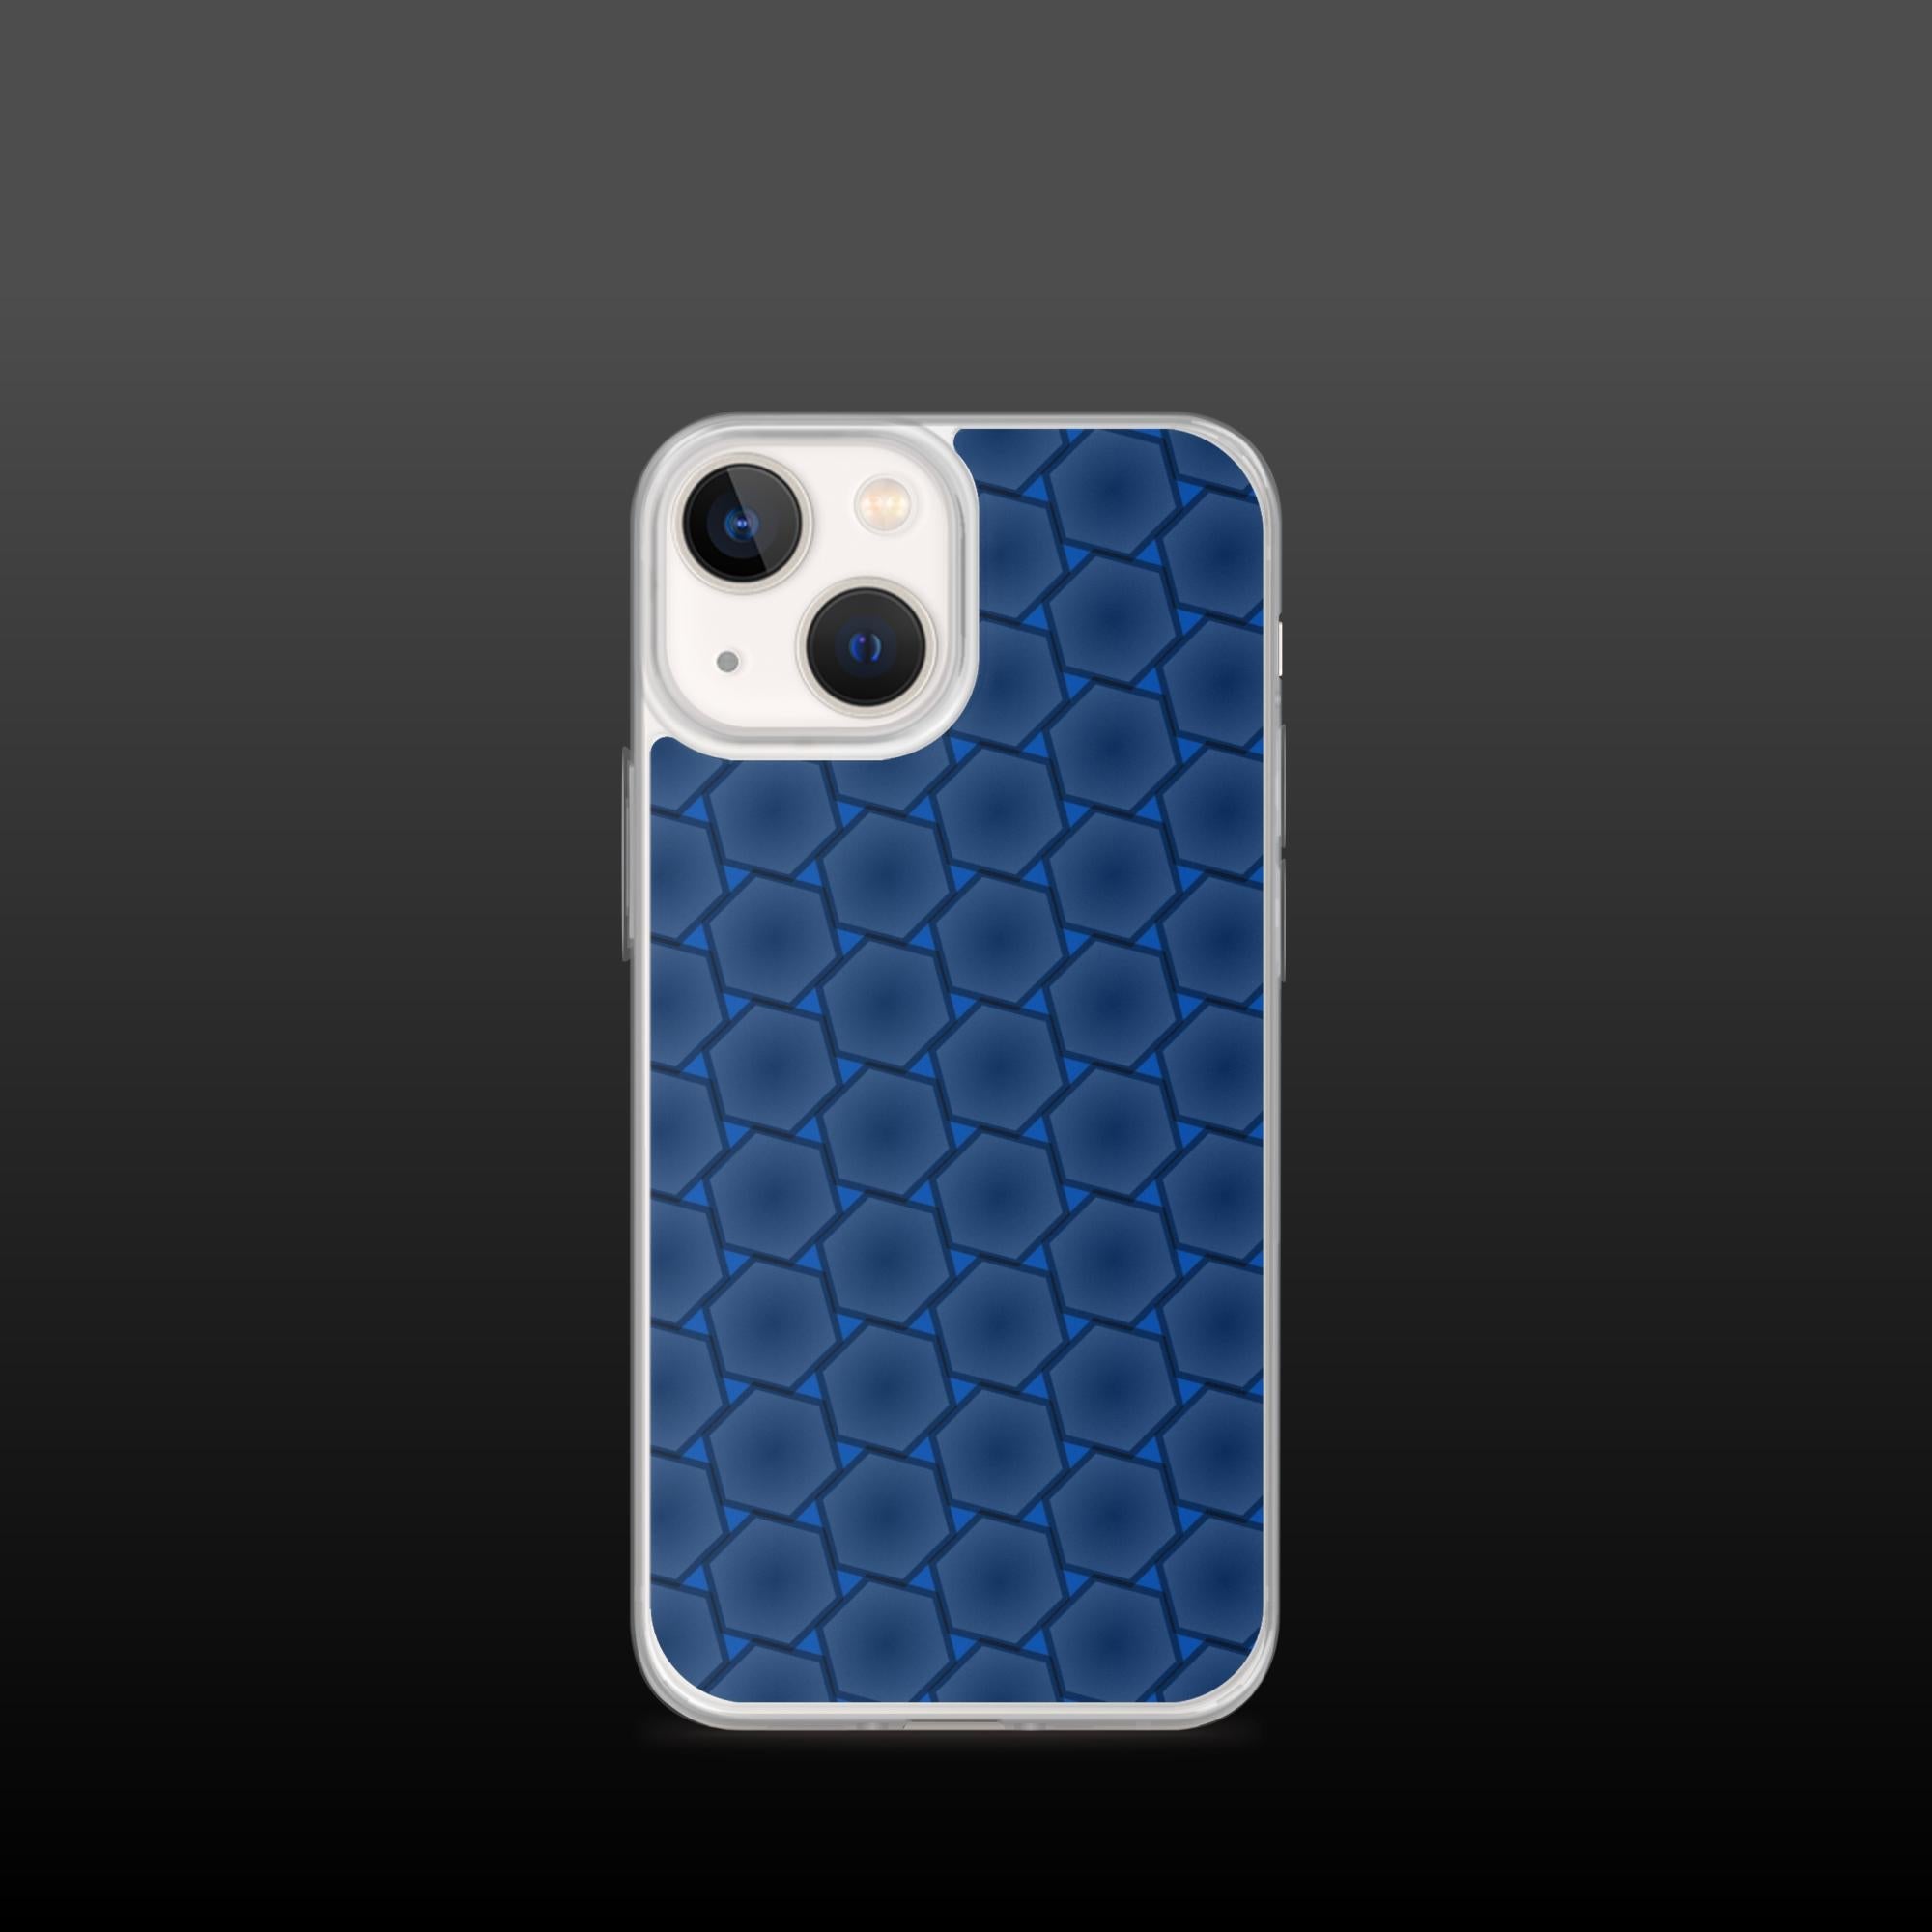 "Dence hexagons grid" clear iphone case - Clear iphone case - Ever colorful